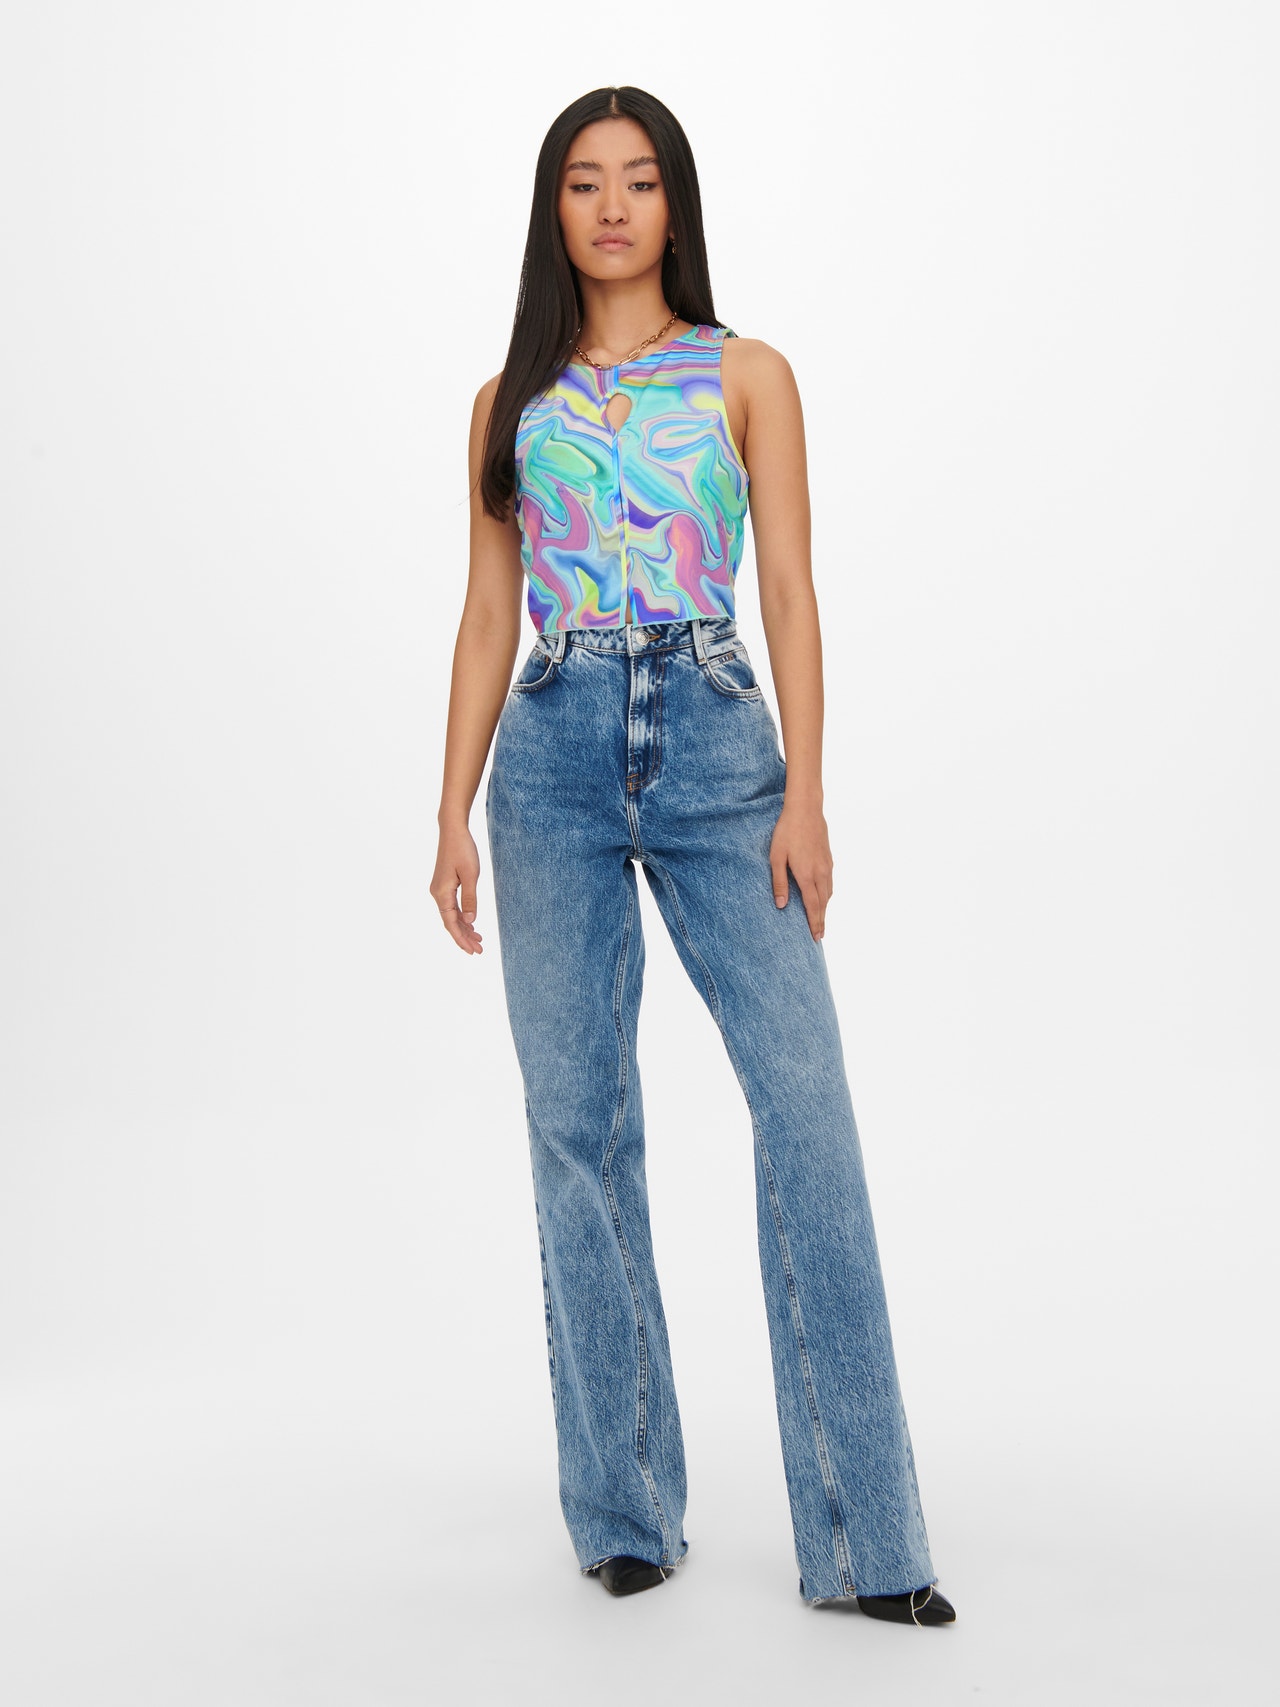 ONLY Cropped cut out Top -Aquarius - 15268541